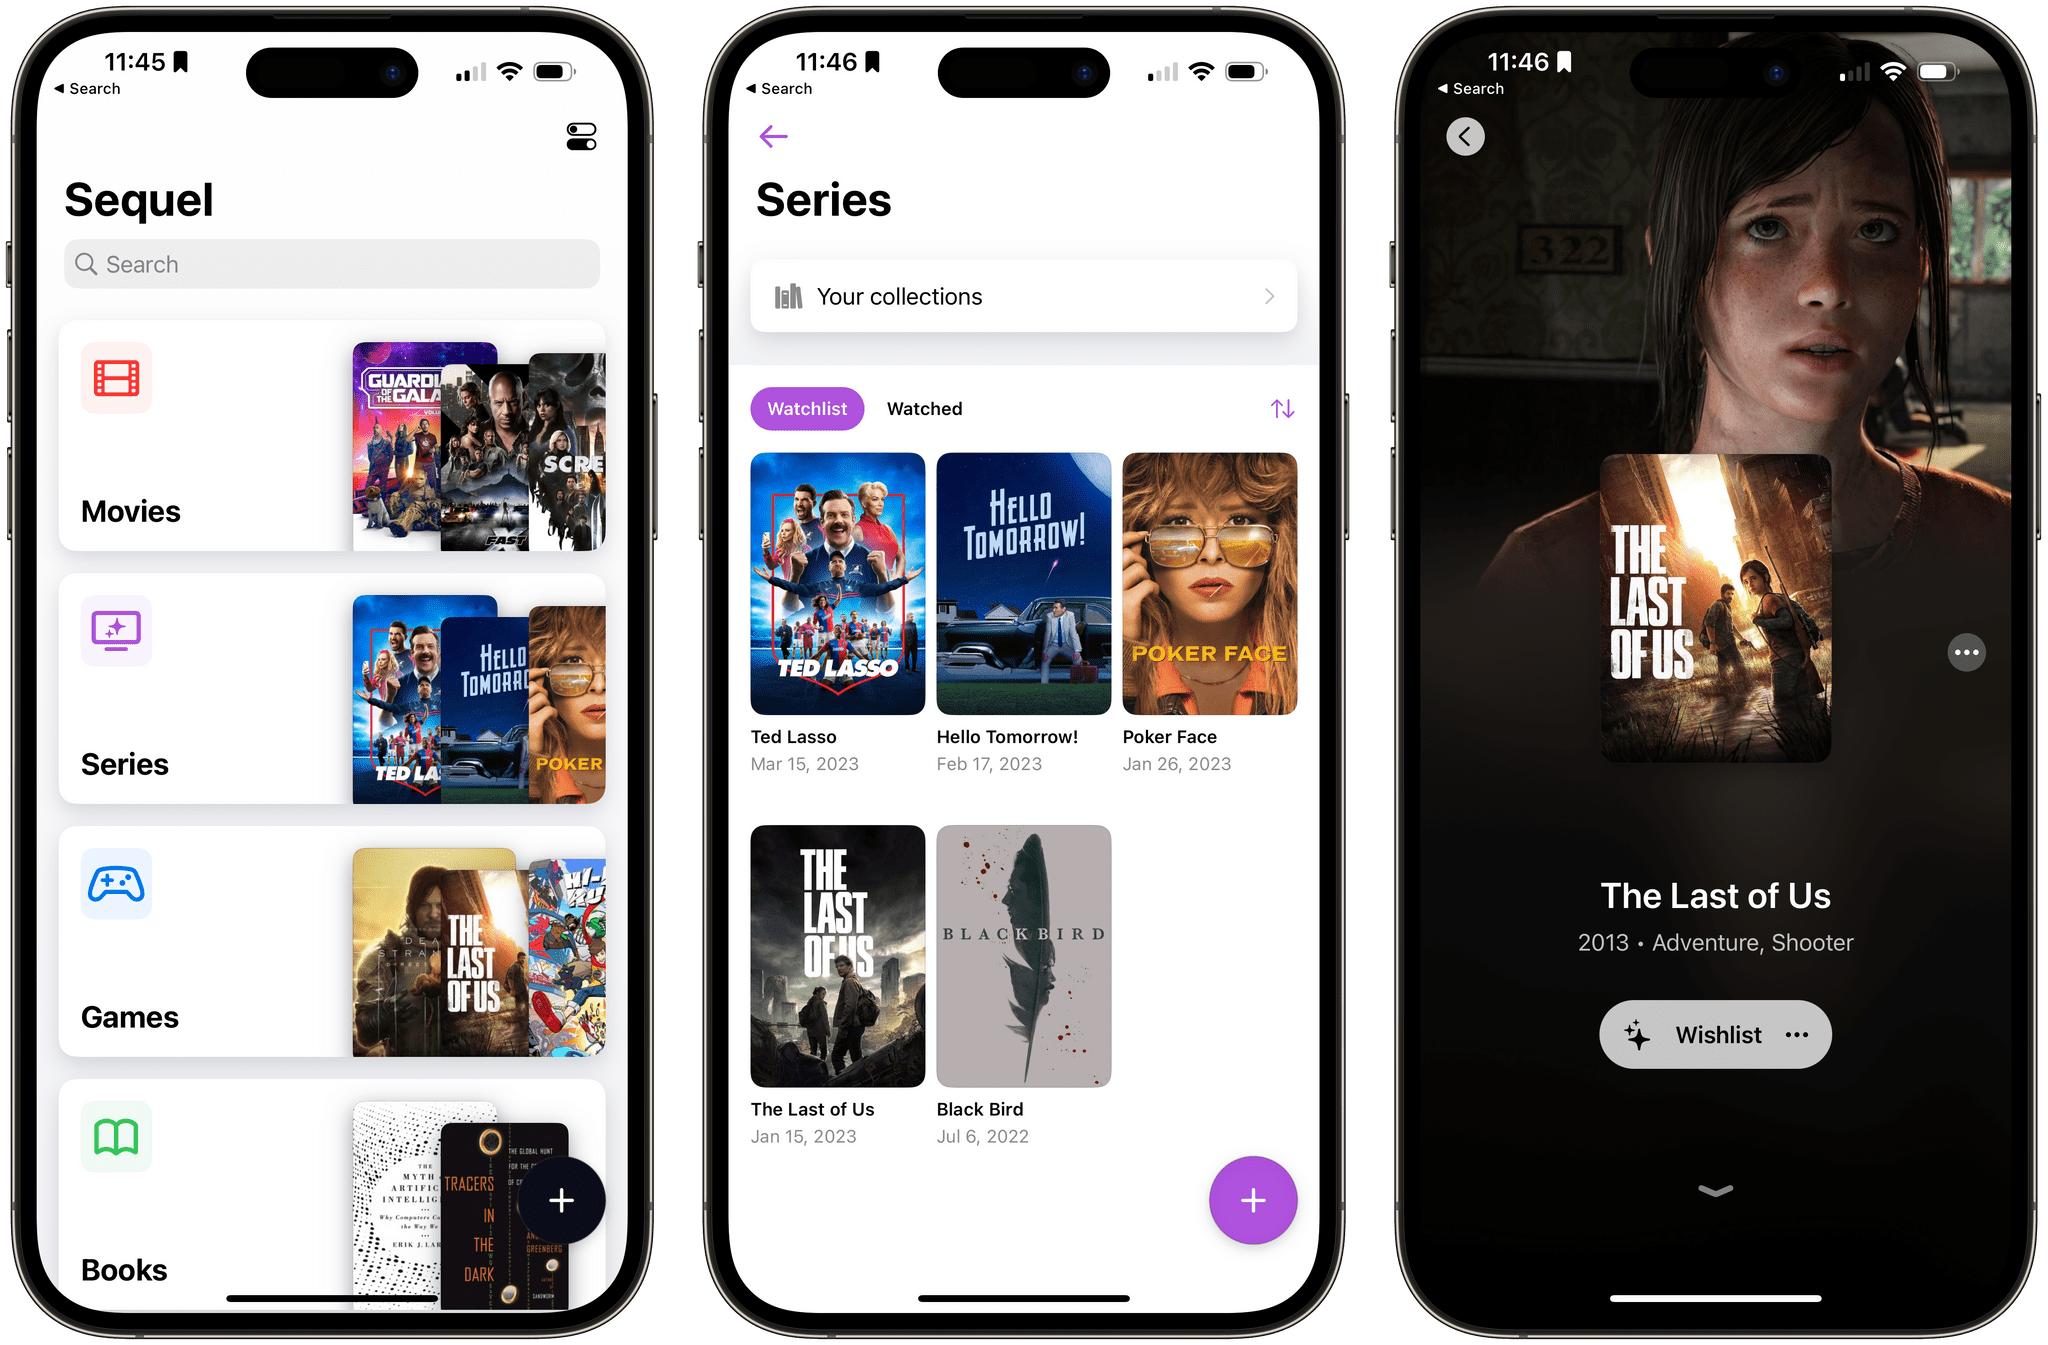 Since Apple removed the Wishlist in iOS 11, this is another great